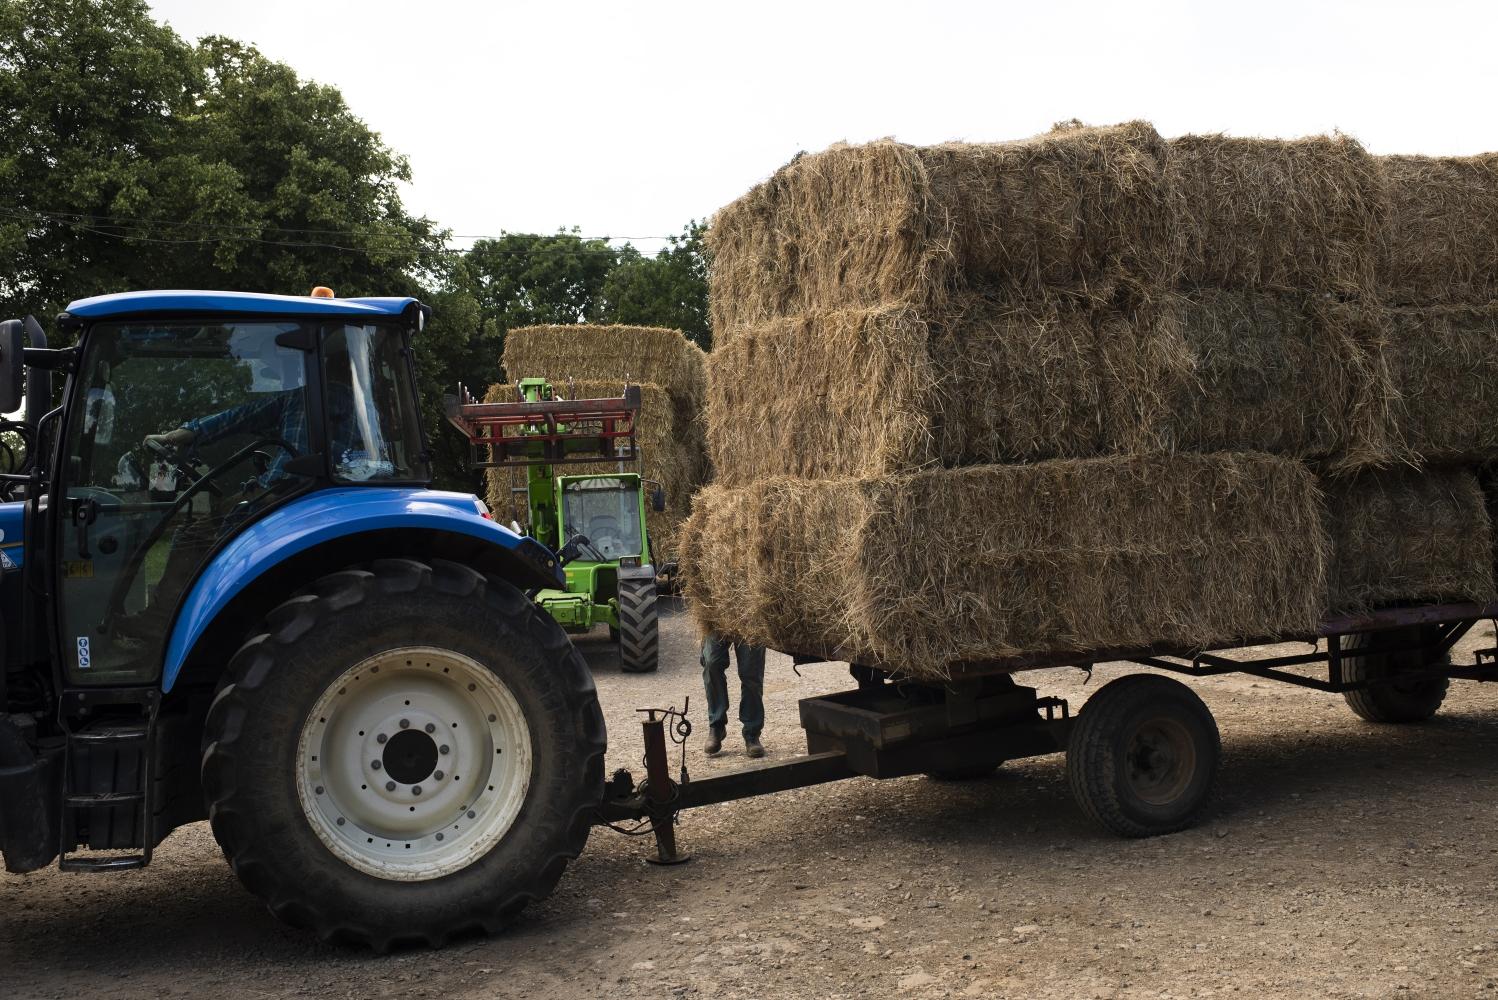 A tractor pulling a trailer of hay stacks